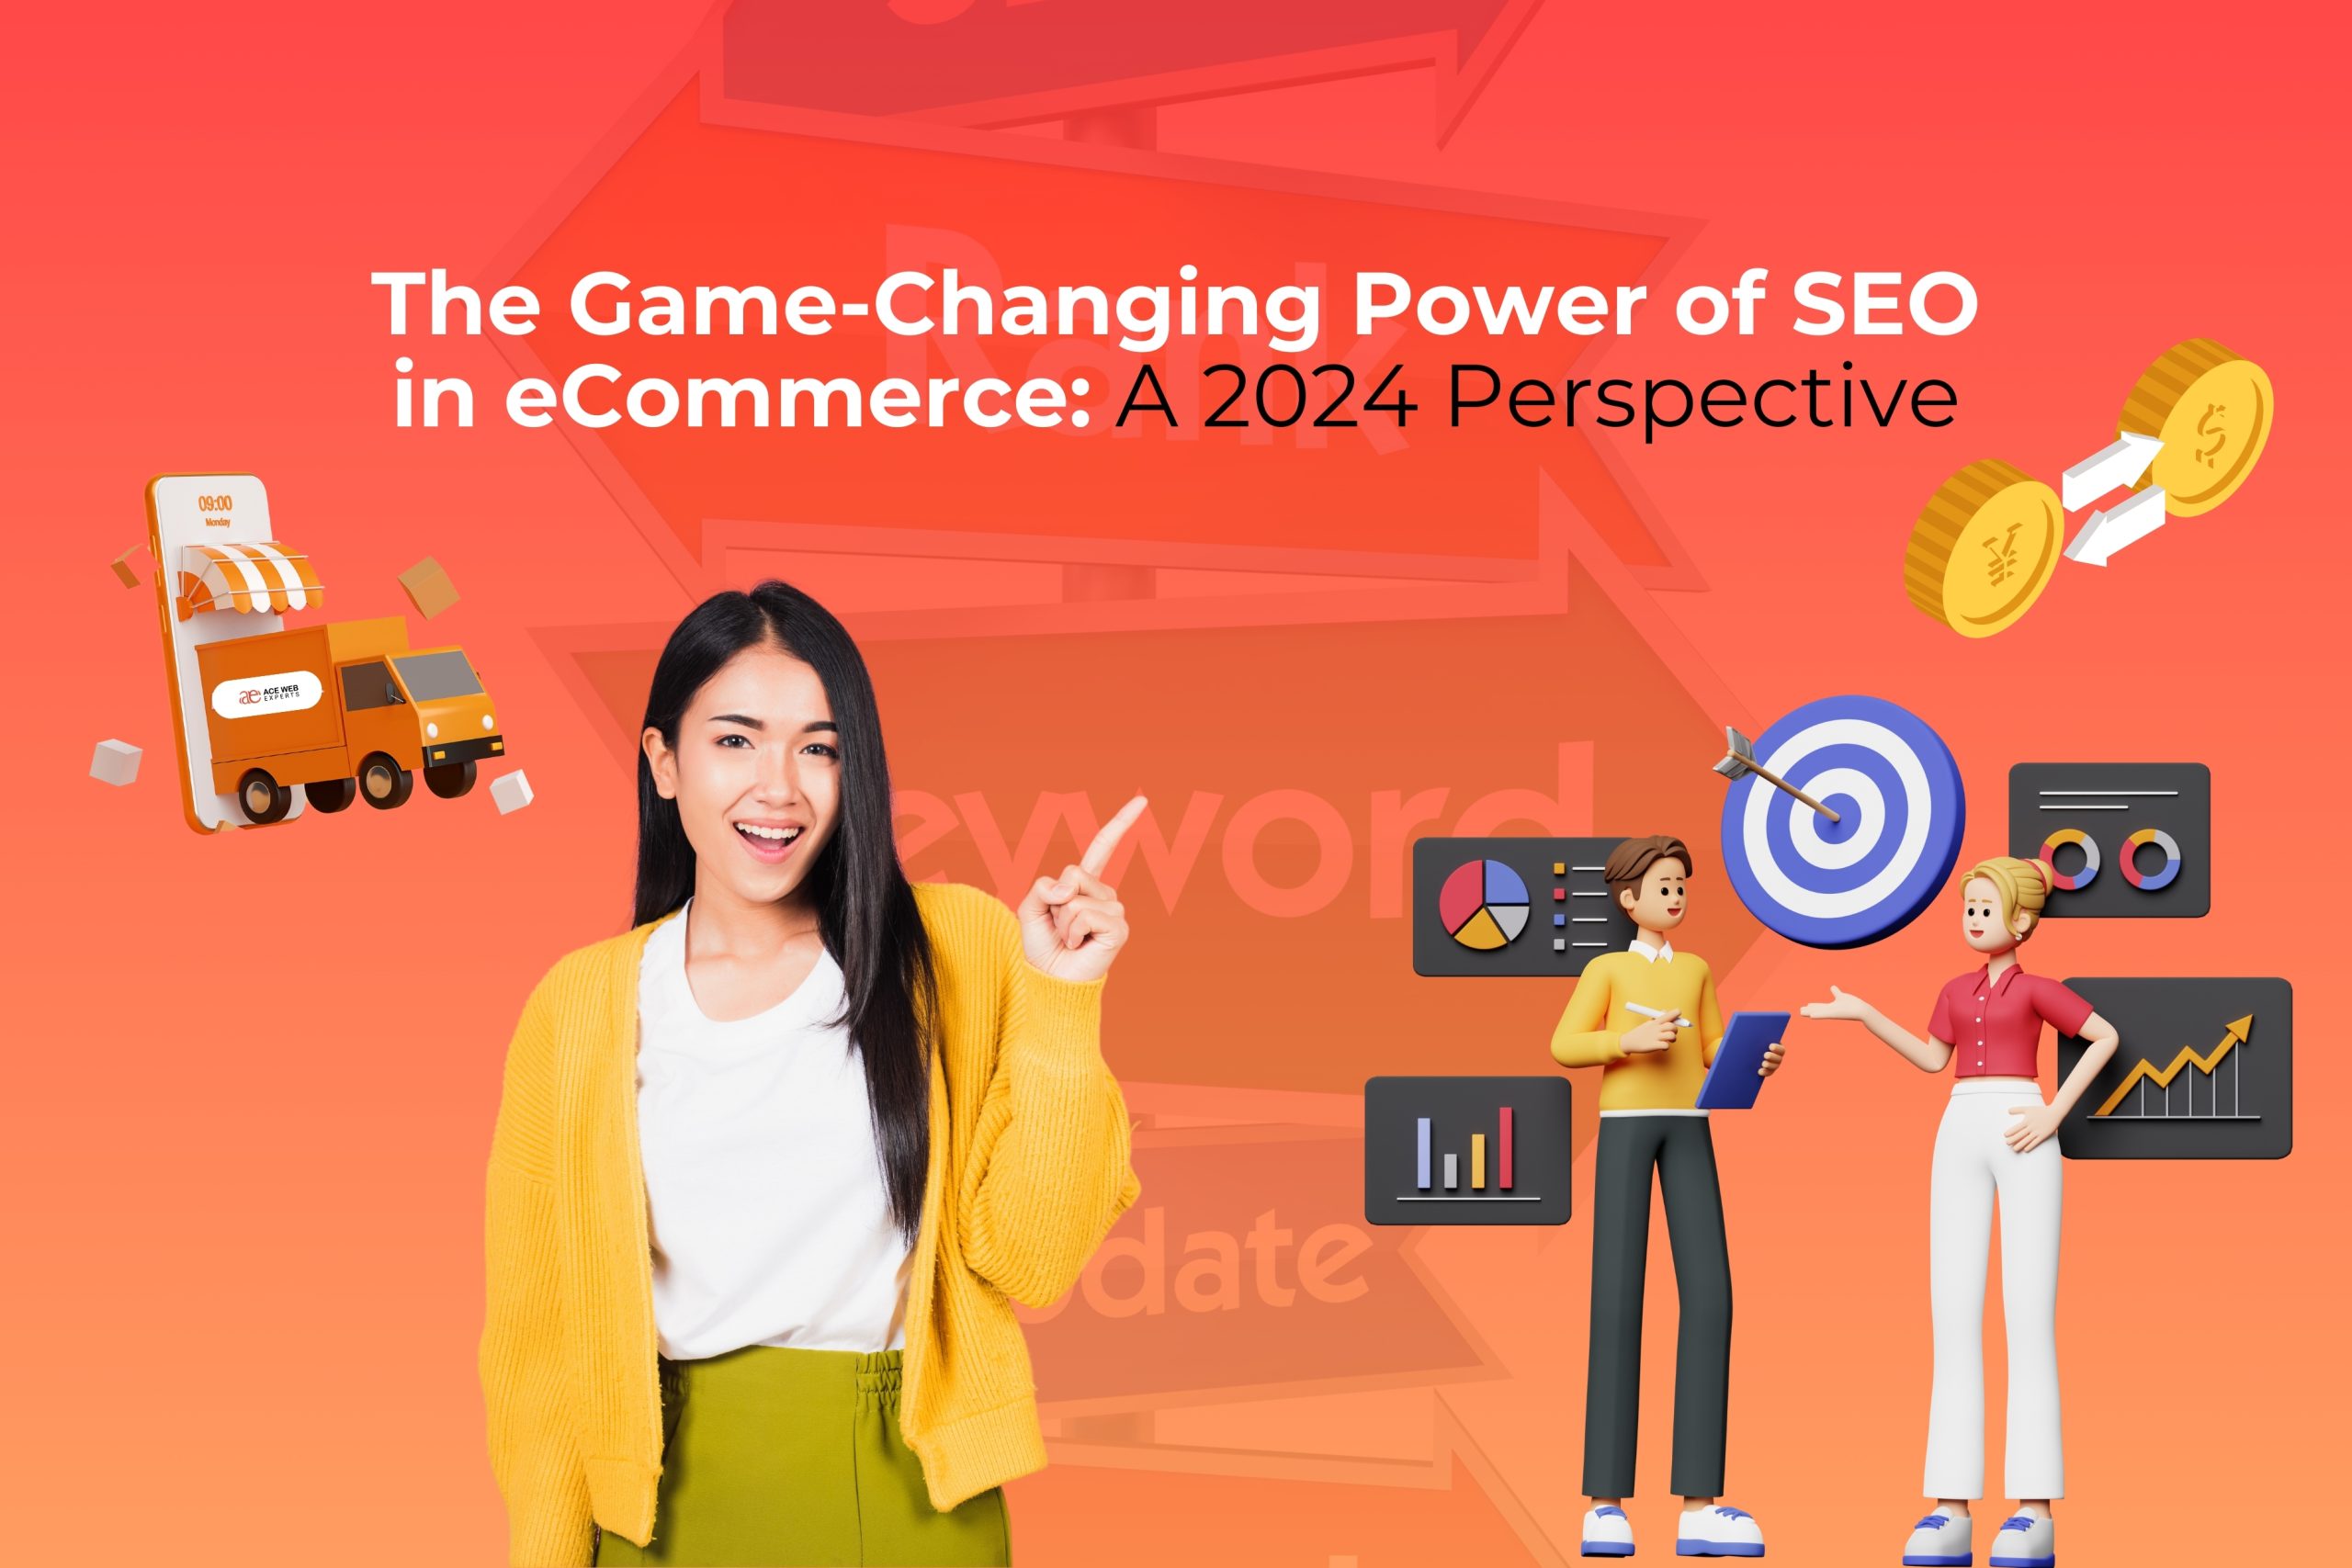 The Game-Changing Power of SEO in eCommerce: A 2024 Perspective